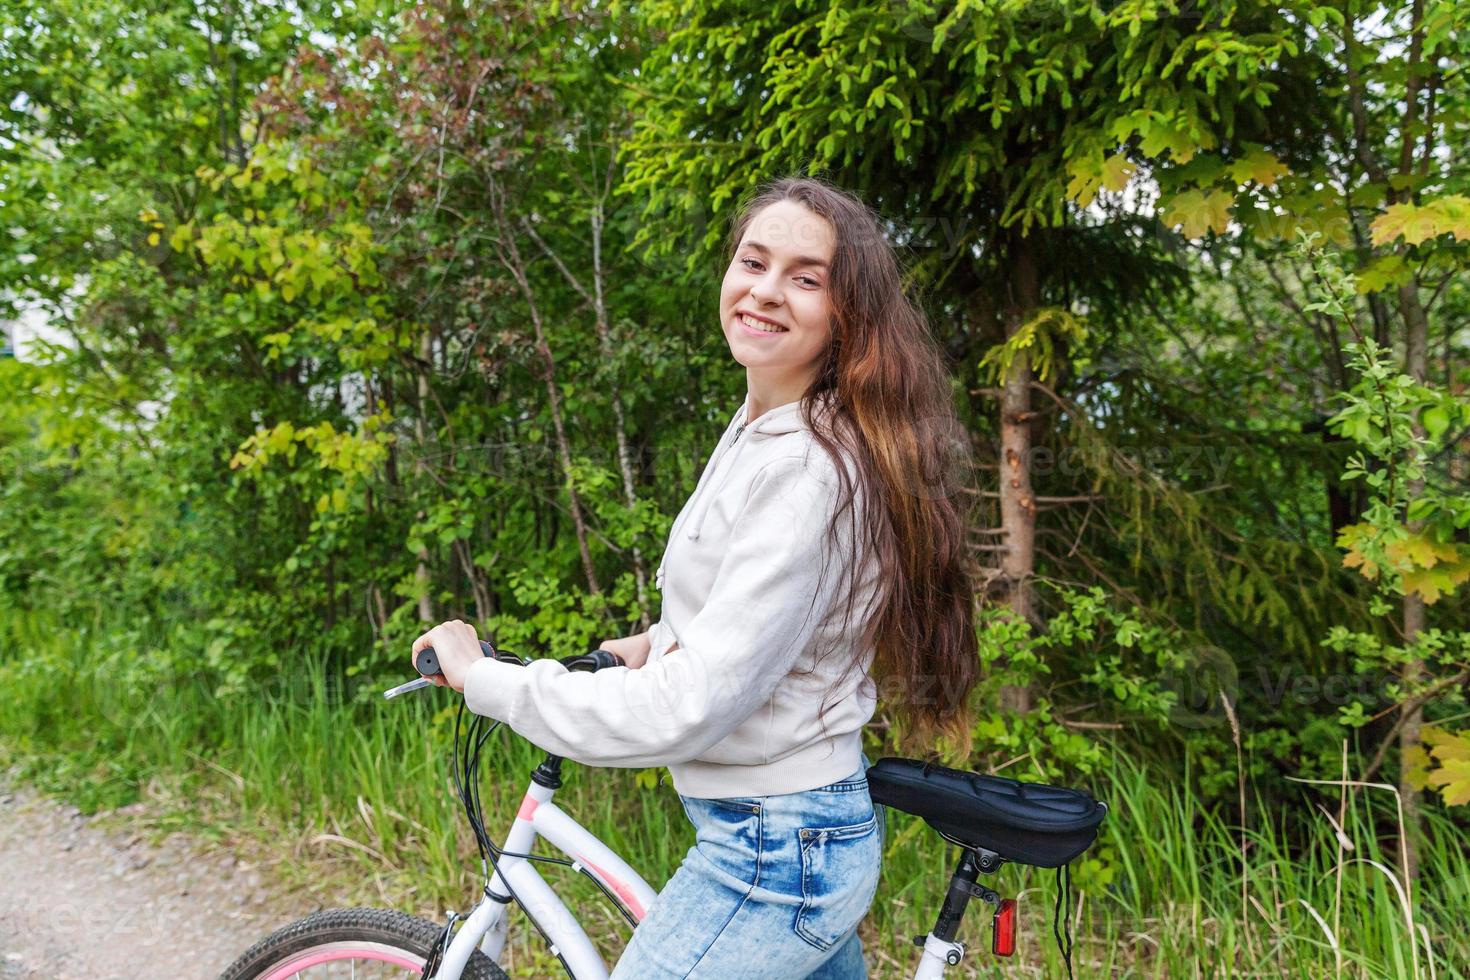 Young woman riding bicycle in summer city park outdoors. Active people. Hipster girl relax and rider bike photo